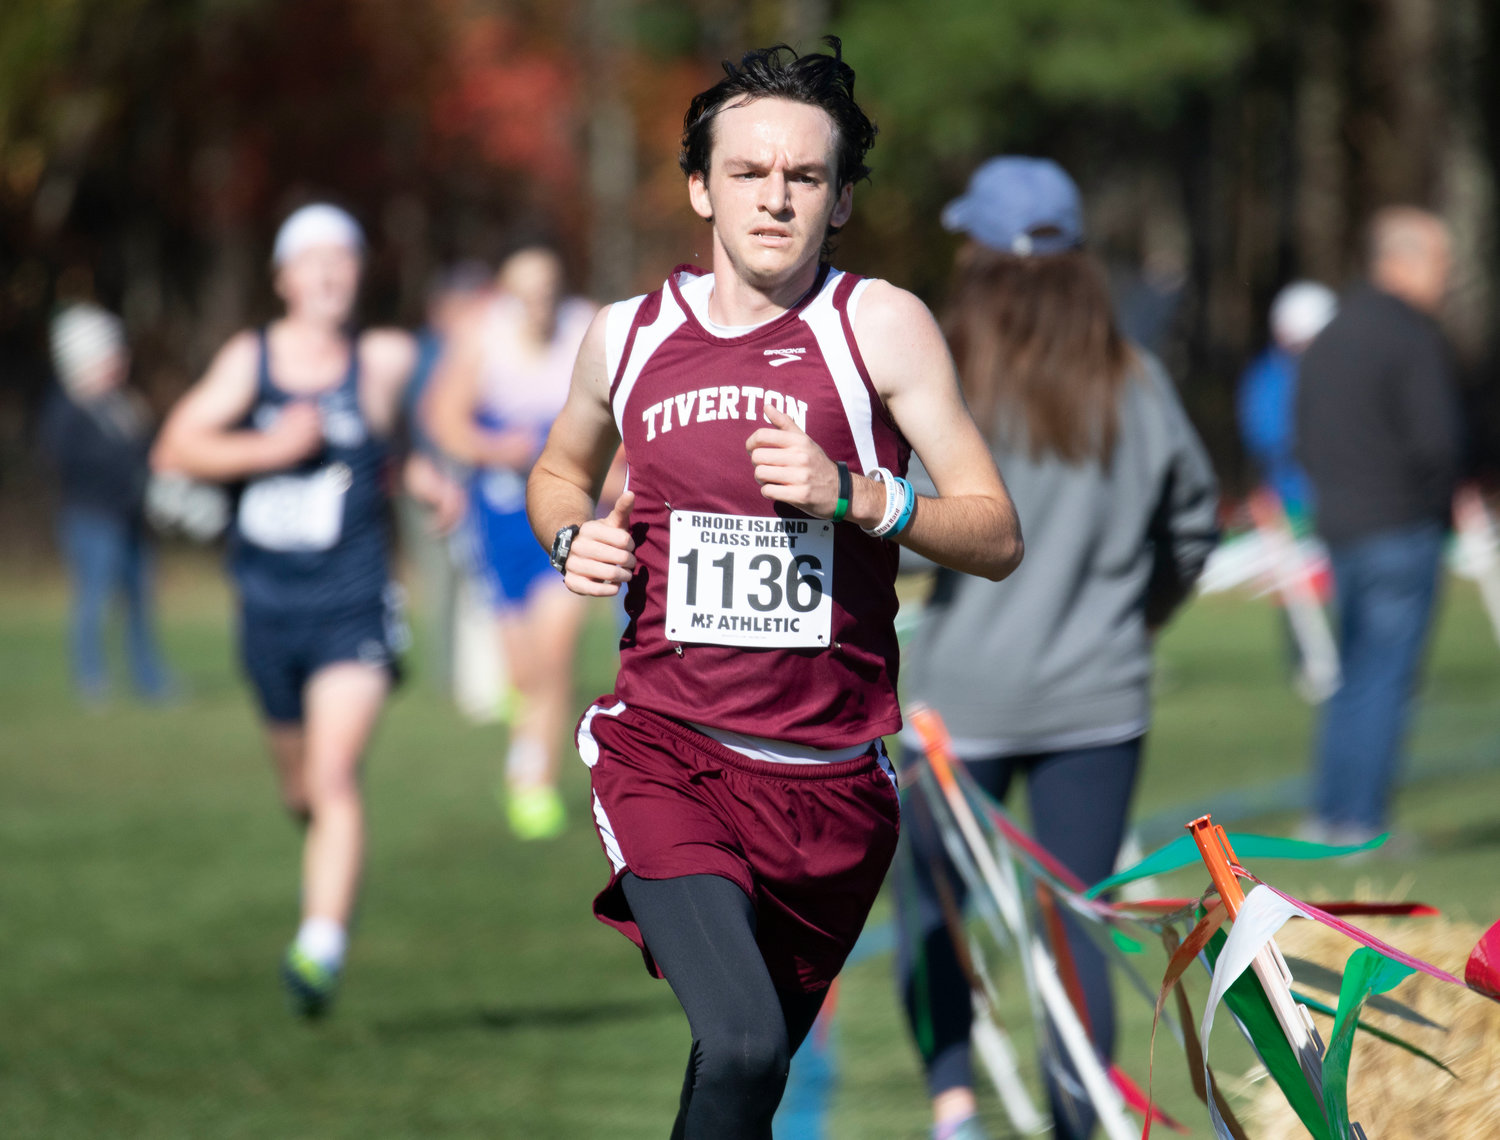 Senior Nick Mercer runs the covered bridge course at Ponaganset during the RI Class Championships on Saturday. He placed 34th and eclipsed his person best by seven seconds with a time of 18:30.3.